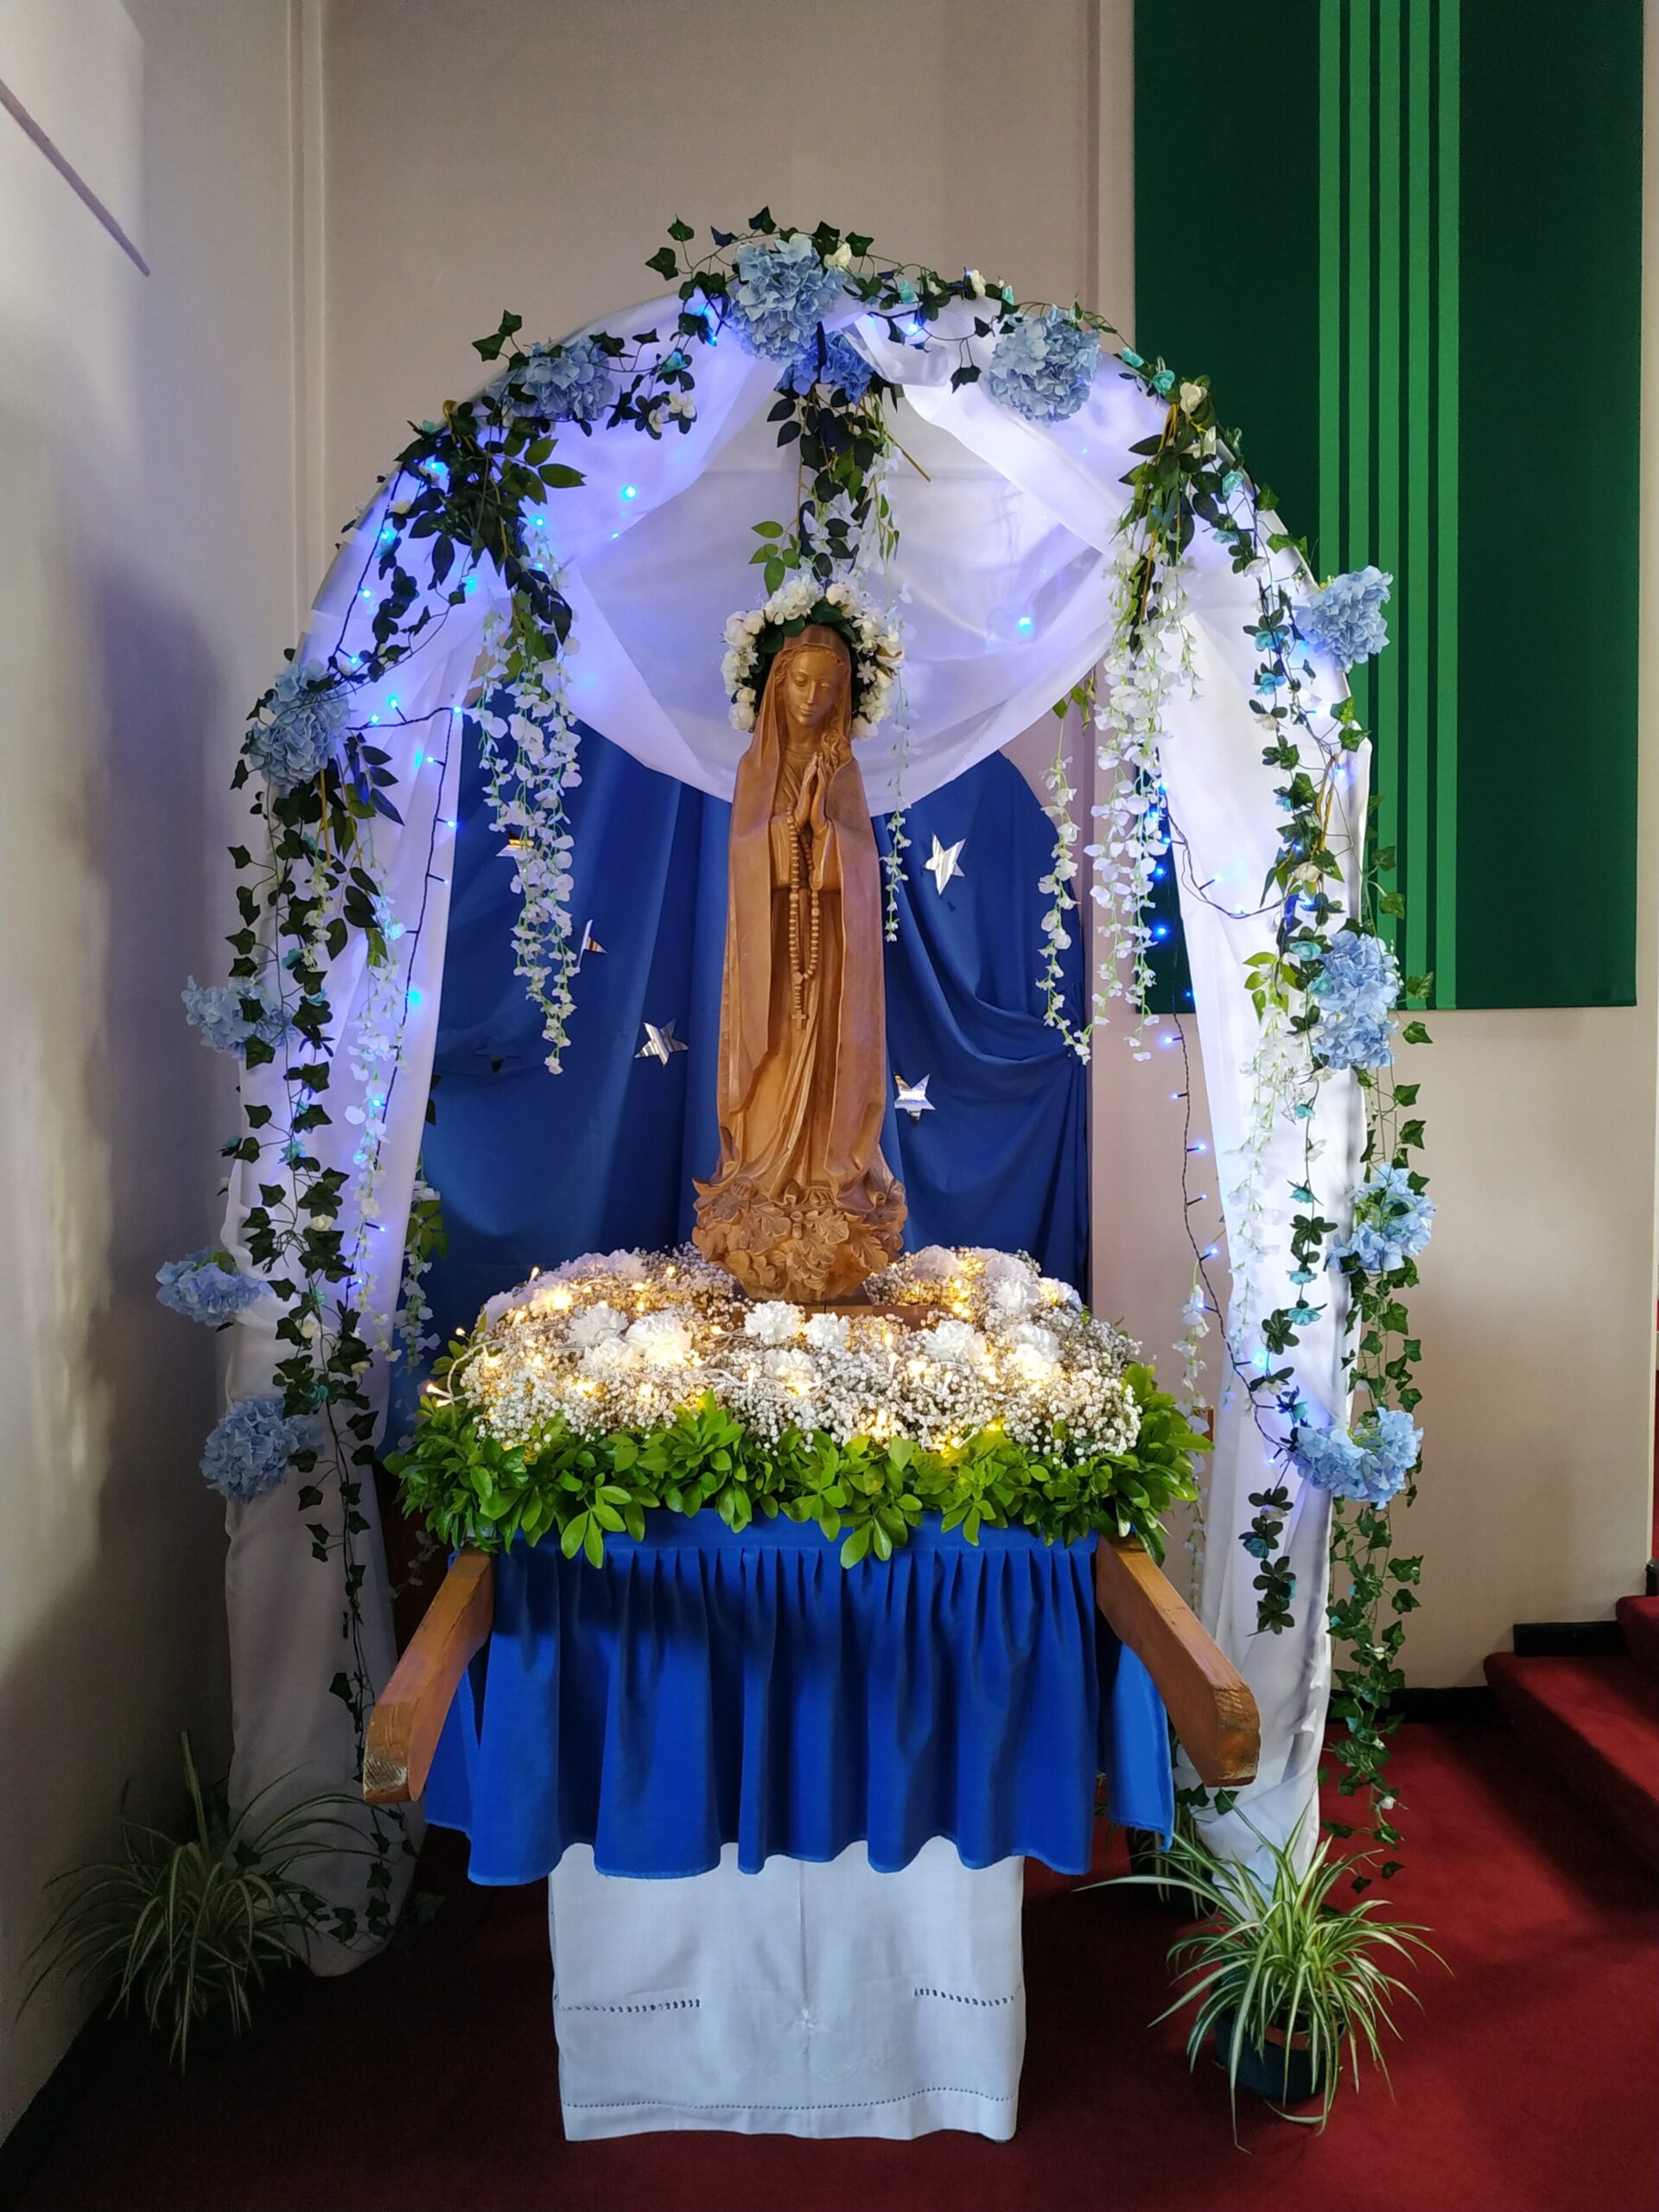 Feast of our Lady of the Rosary